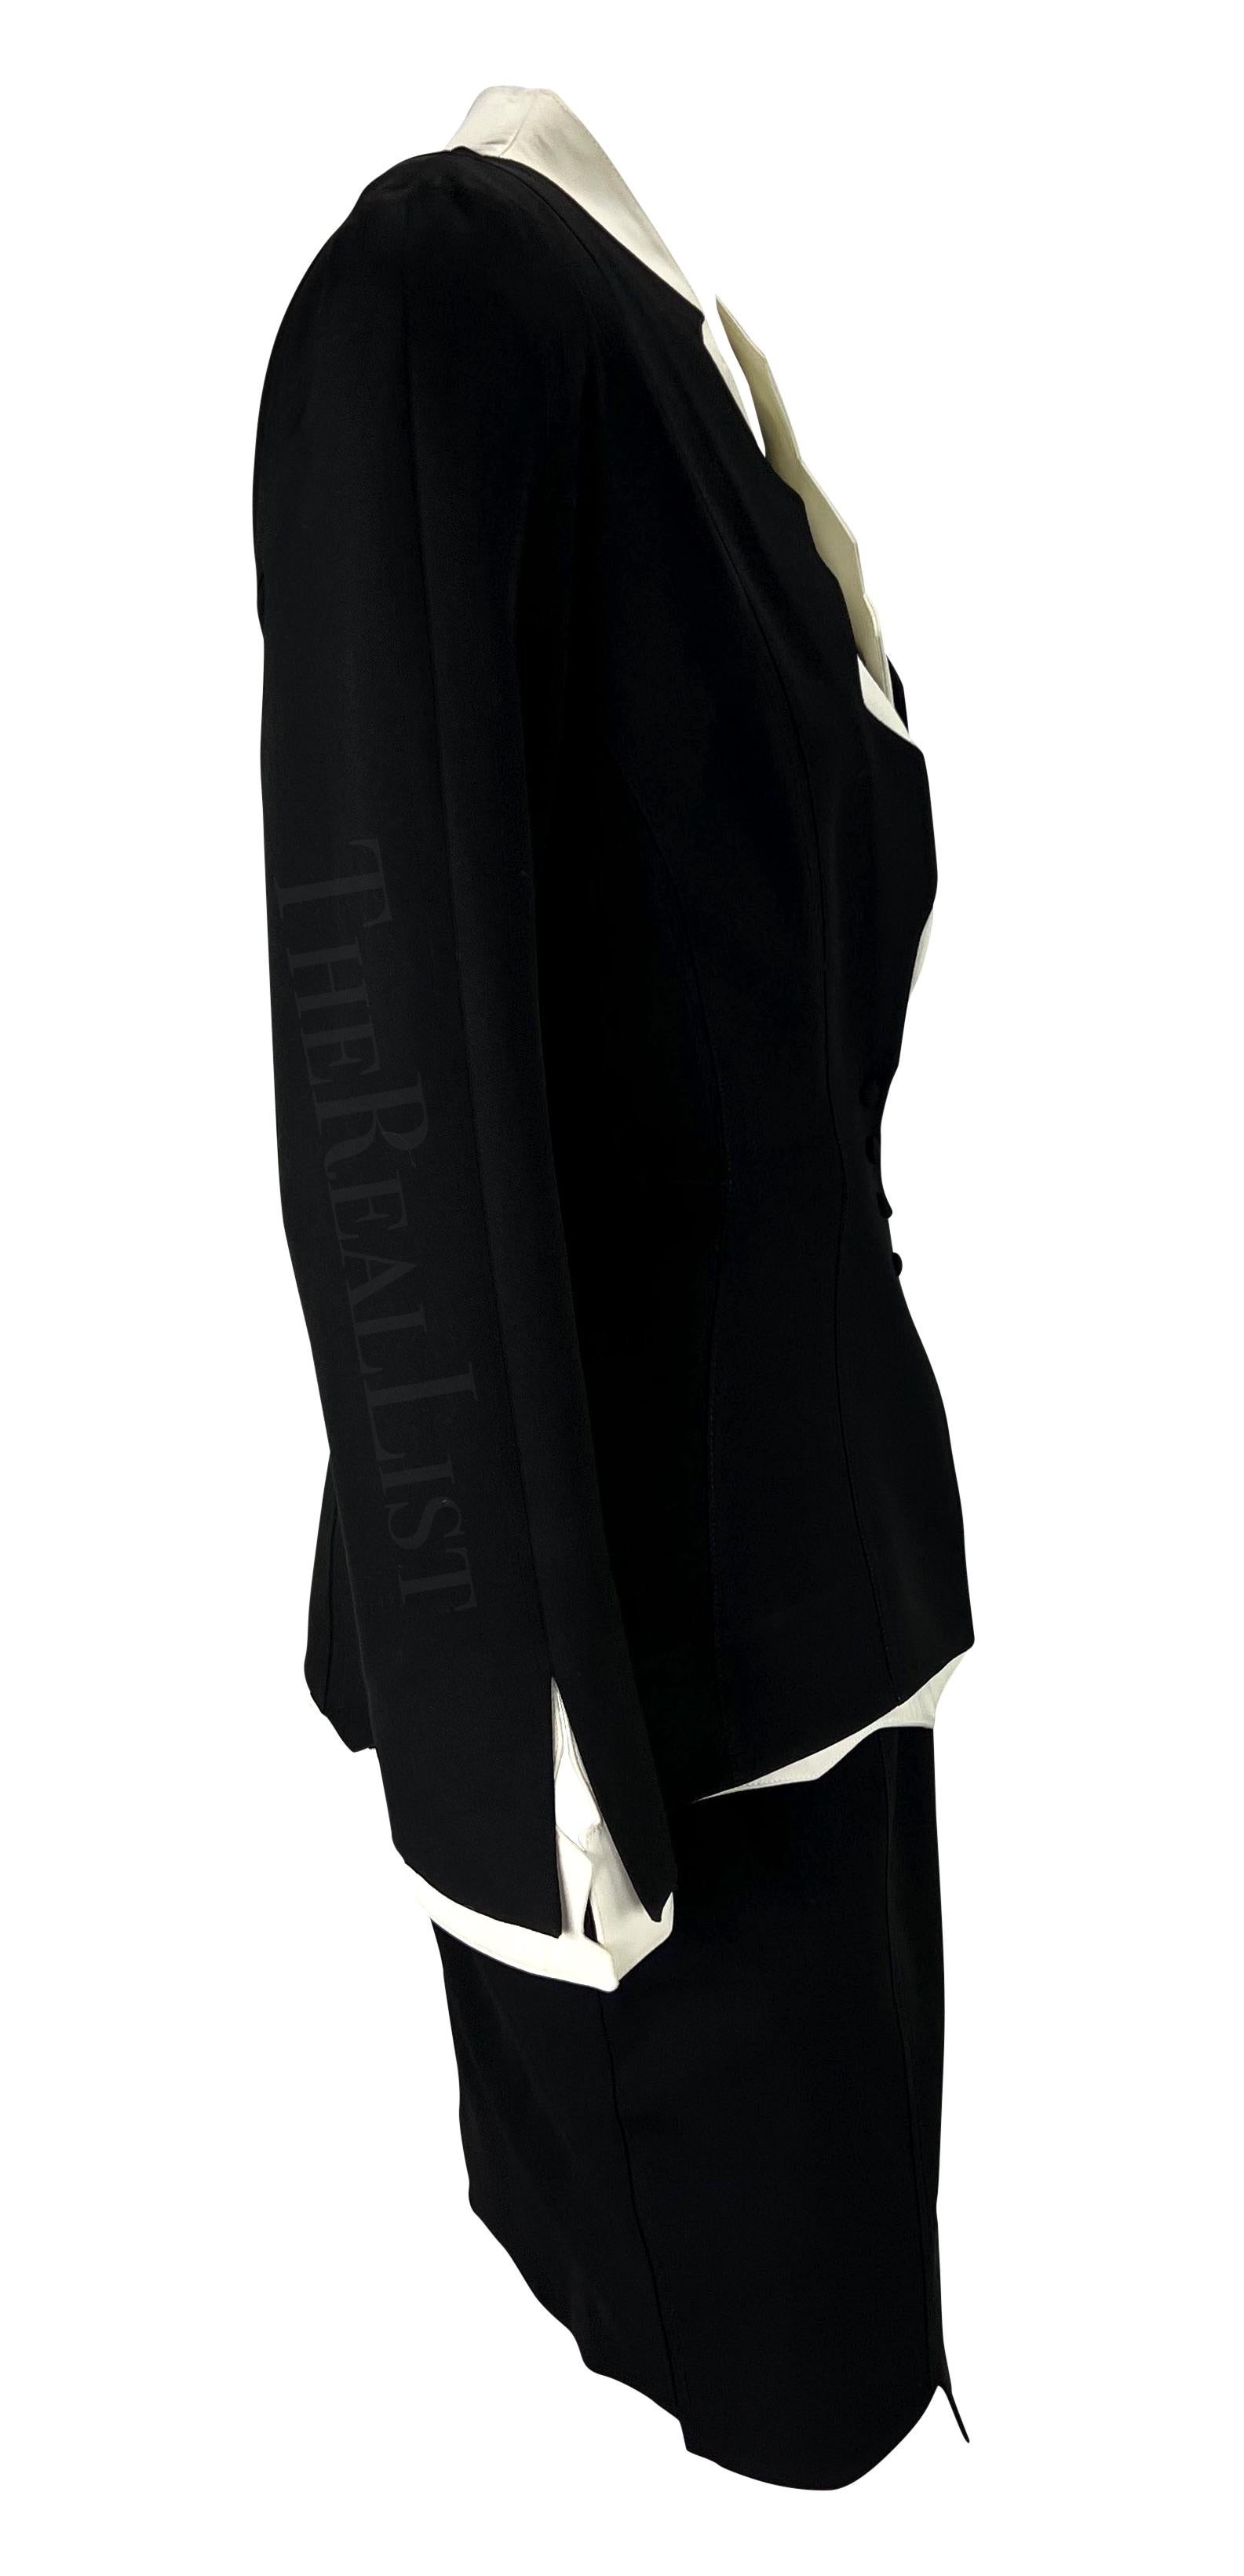 S/S 1994 Thierry Mugler Black White Sculptural Skirt Suit 2